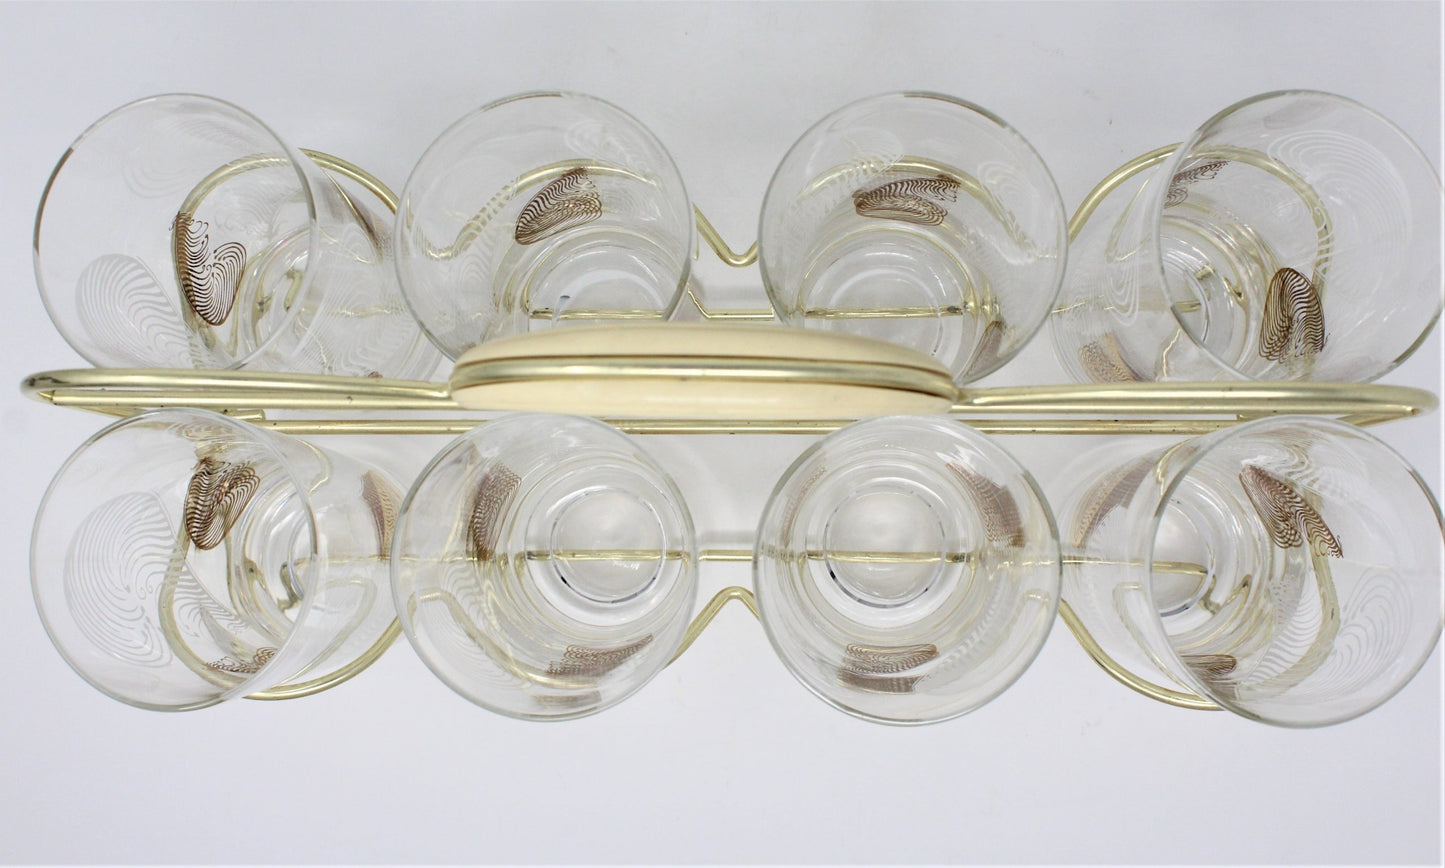 Glasses, Cocktail / Highball with Caddy / Carrier, Feathers White & Gold, Set of 8, Vintage